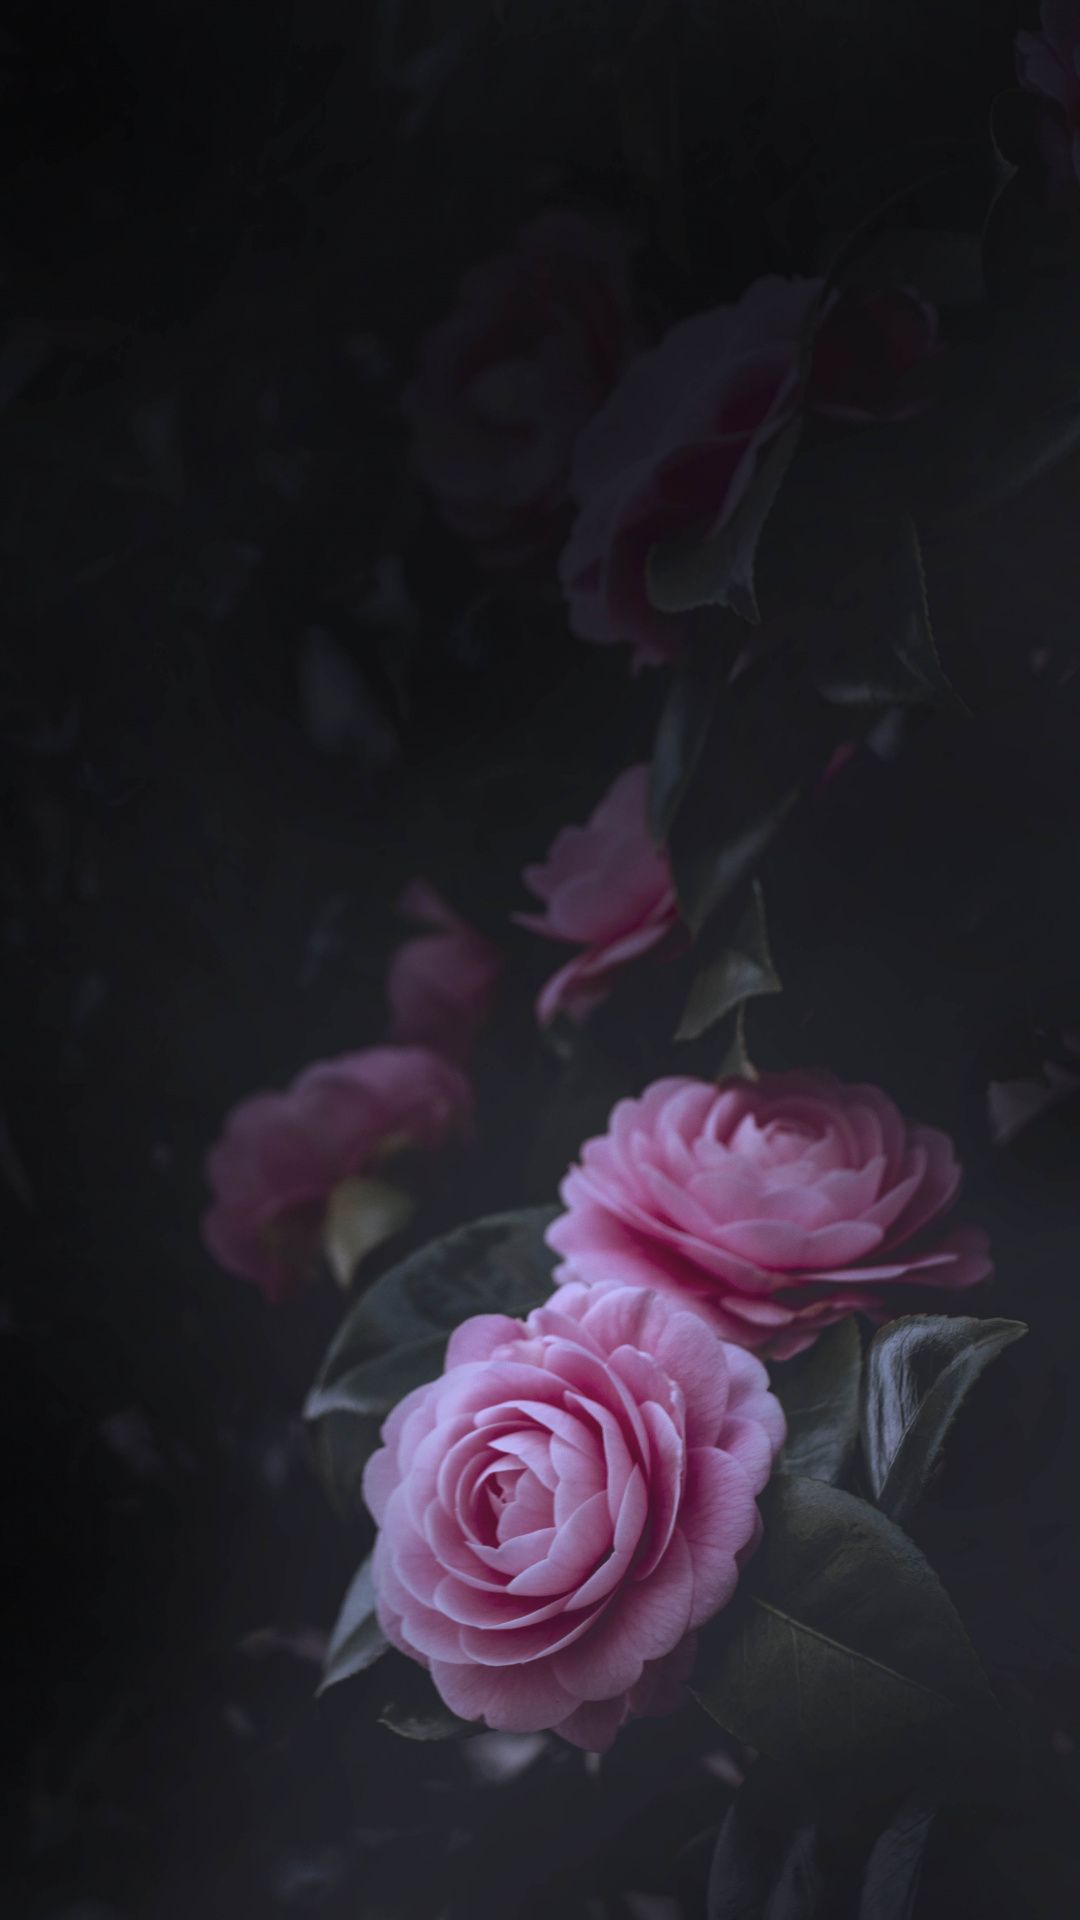 Black And Pink Rose Wallpapers